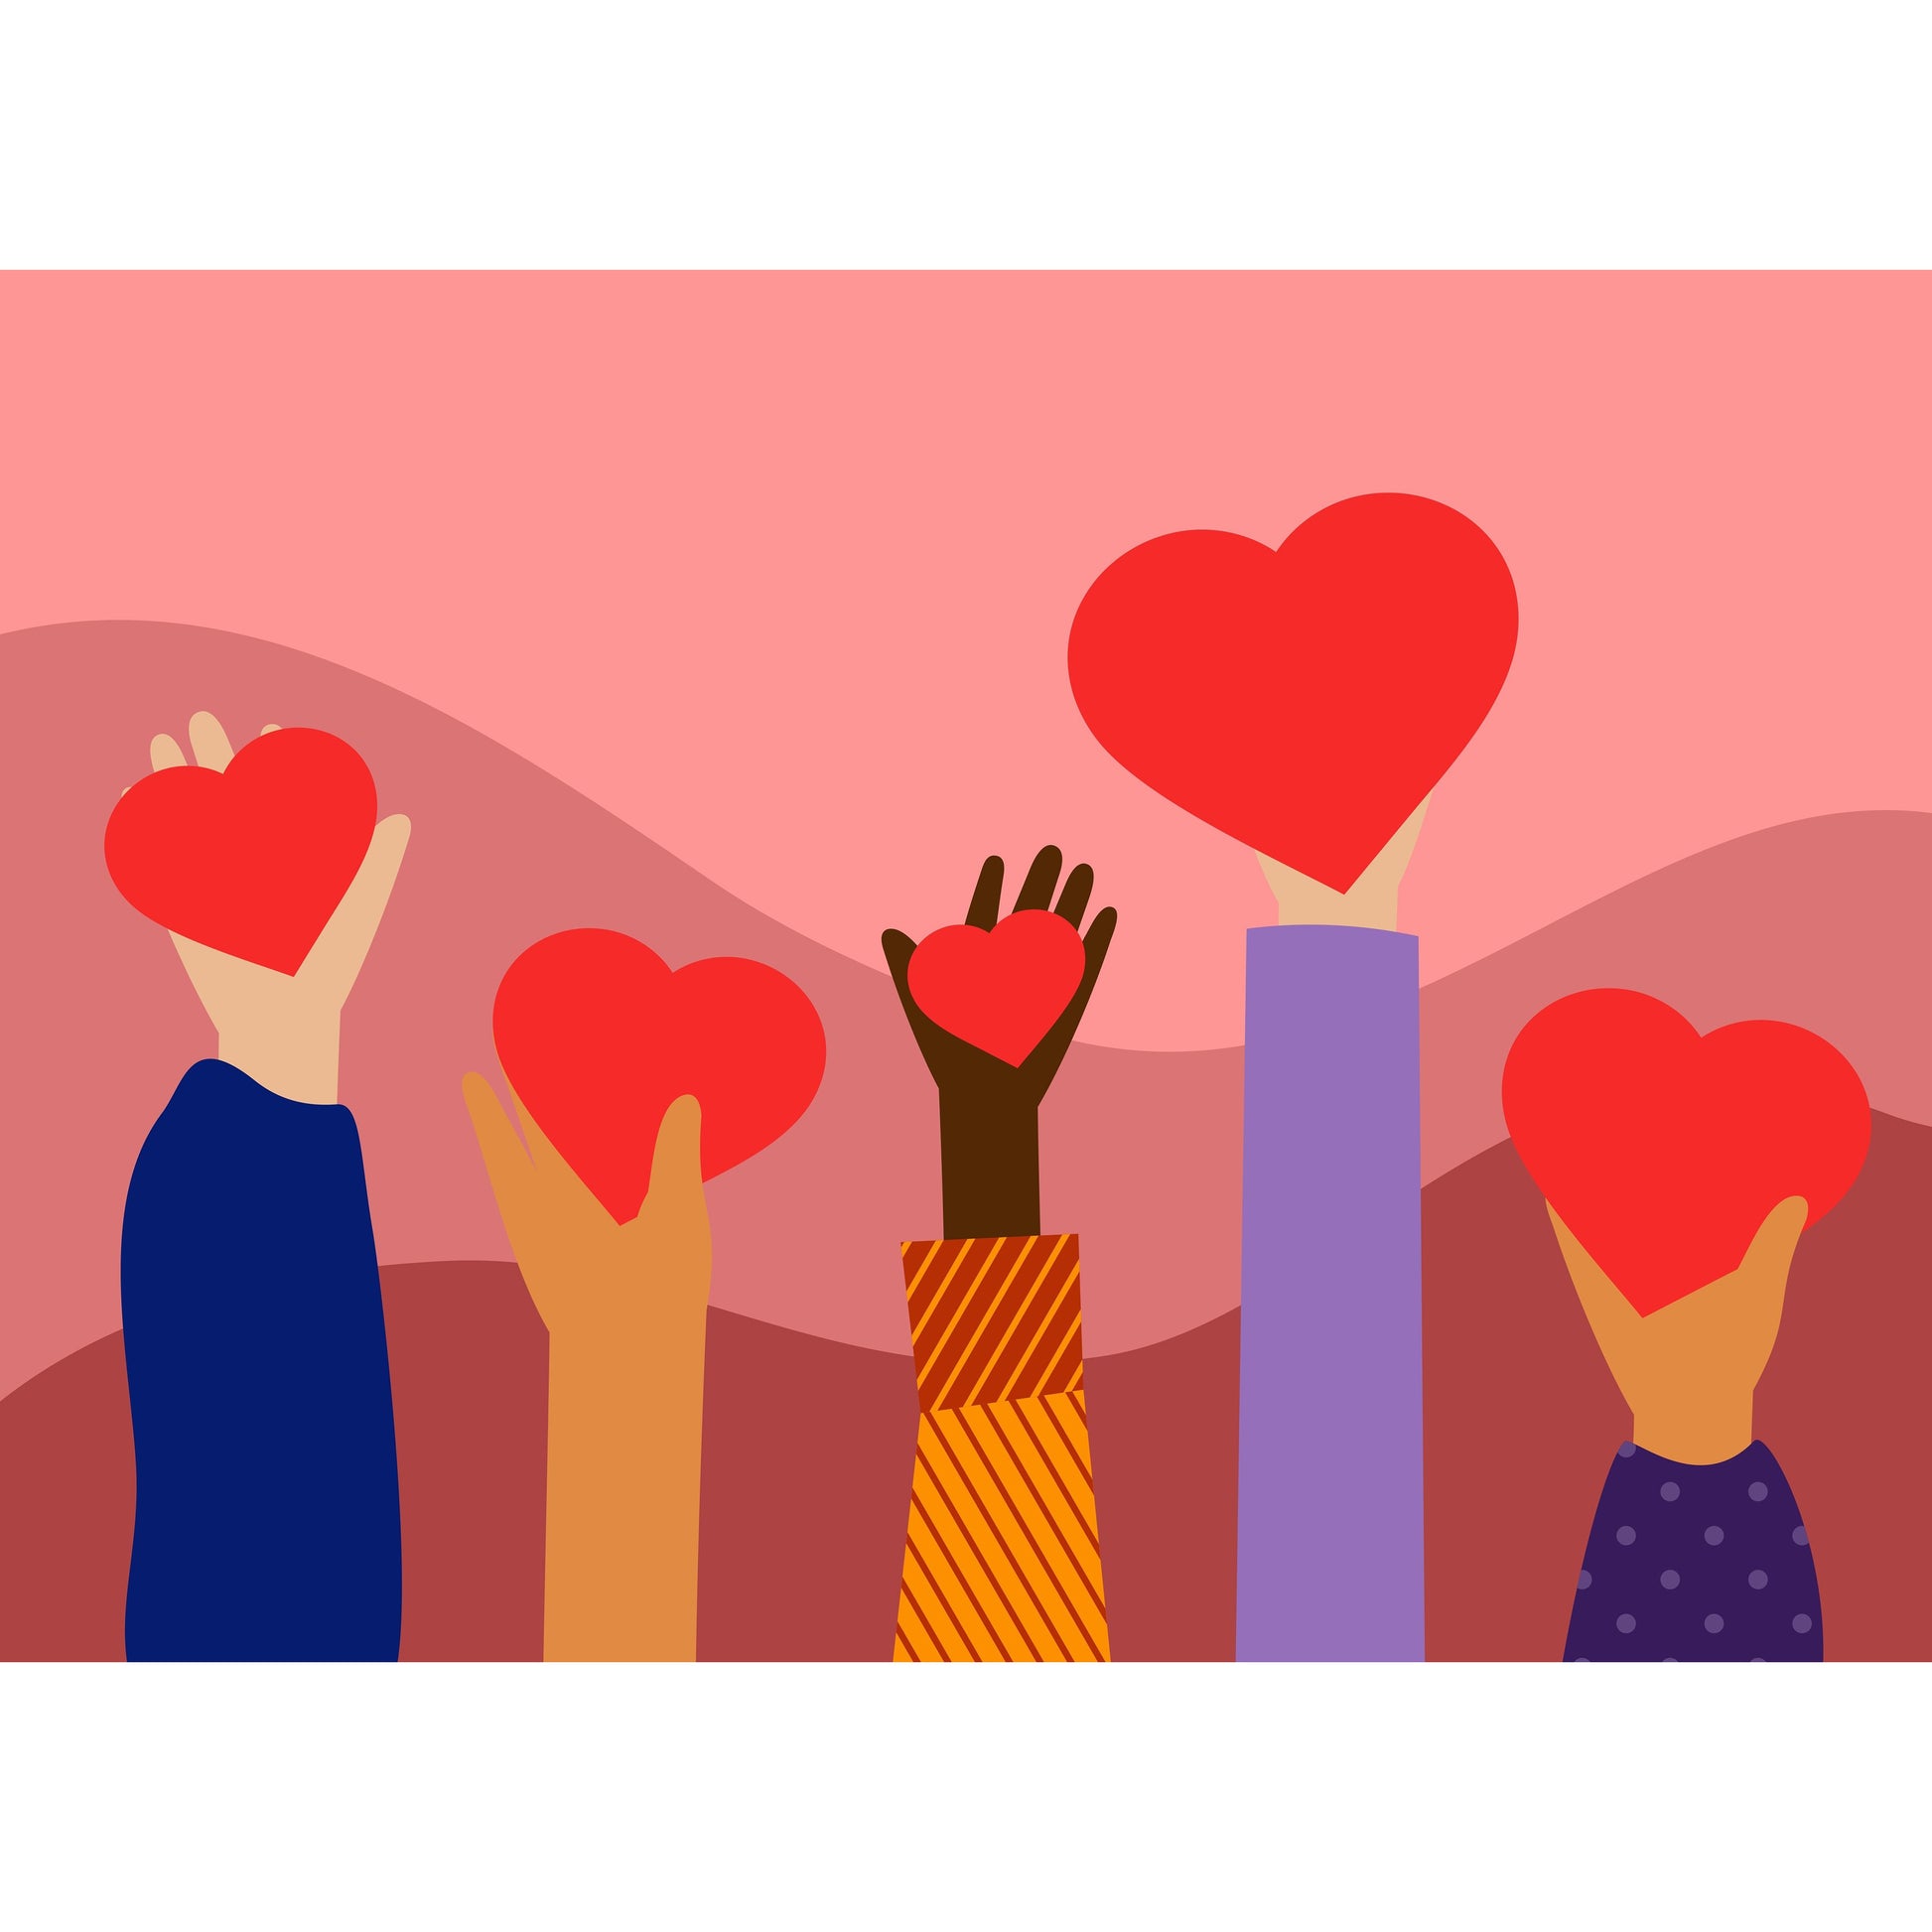  The image is an illustration featuring five hands raised up against a pink and purple background, each hand holding a red heart. The hands are of various skin tones and are wearing different sleeves, symbolizing diversity and unity. The style is simple with flat colors and shapes, conveying a message of love and togetherness.